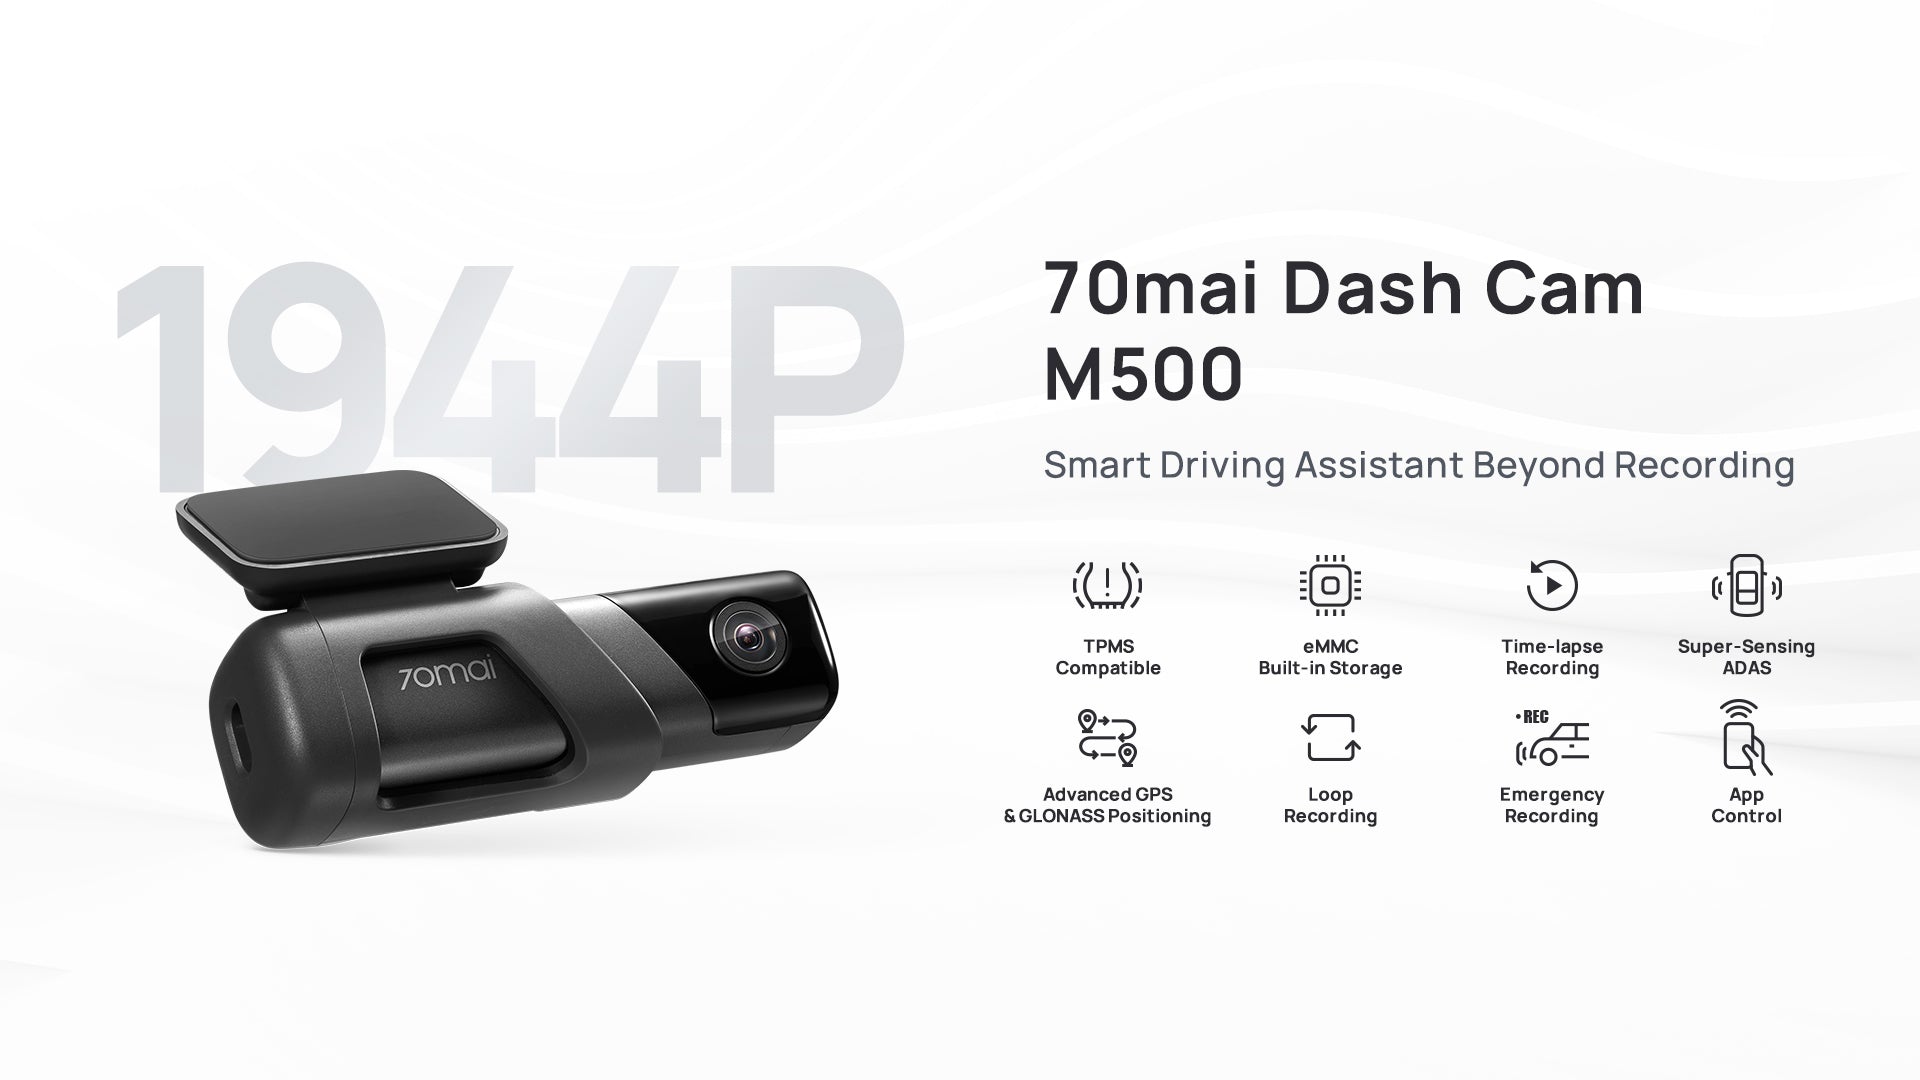 70mai M500 DashCam, 1944P Resolution, GPS, Extended ADAS, Voice Control,  170° Wide Angle, eMMC Storage, Driving Data Overlay, Wi-Fi, App Control